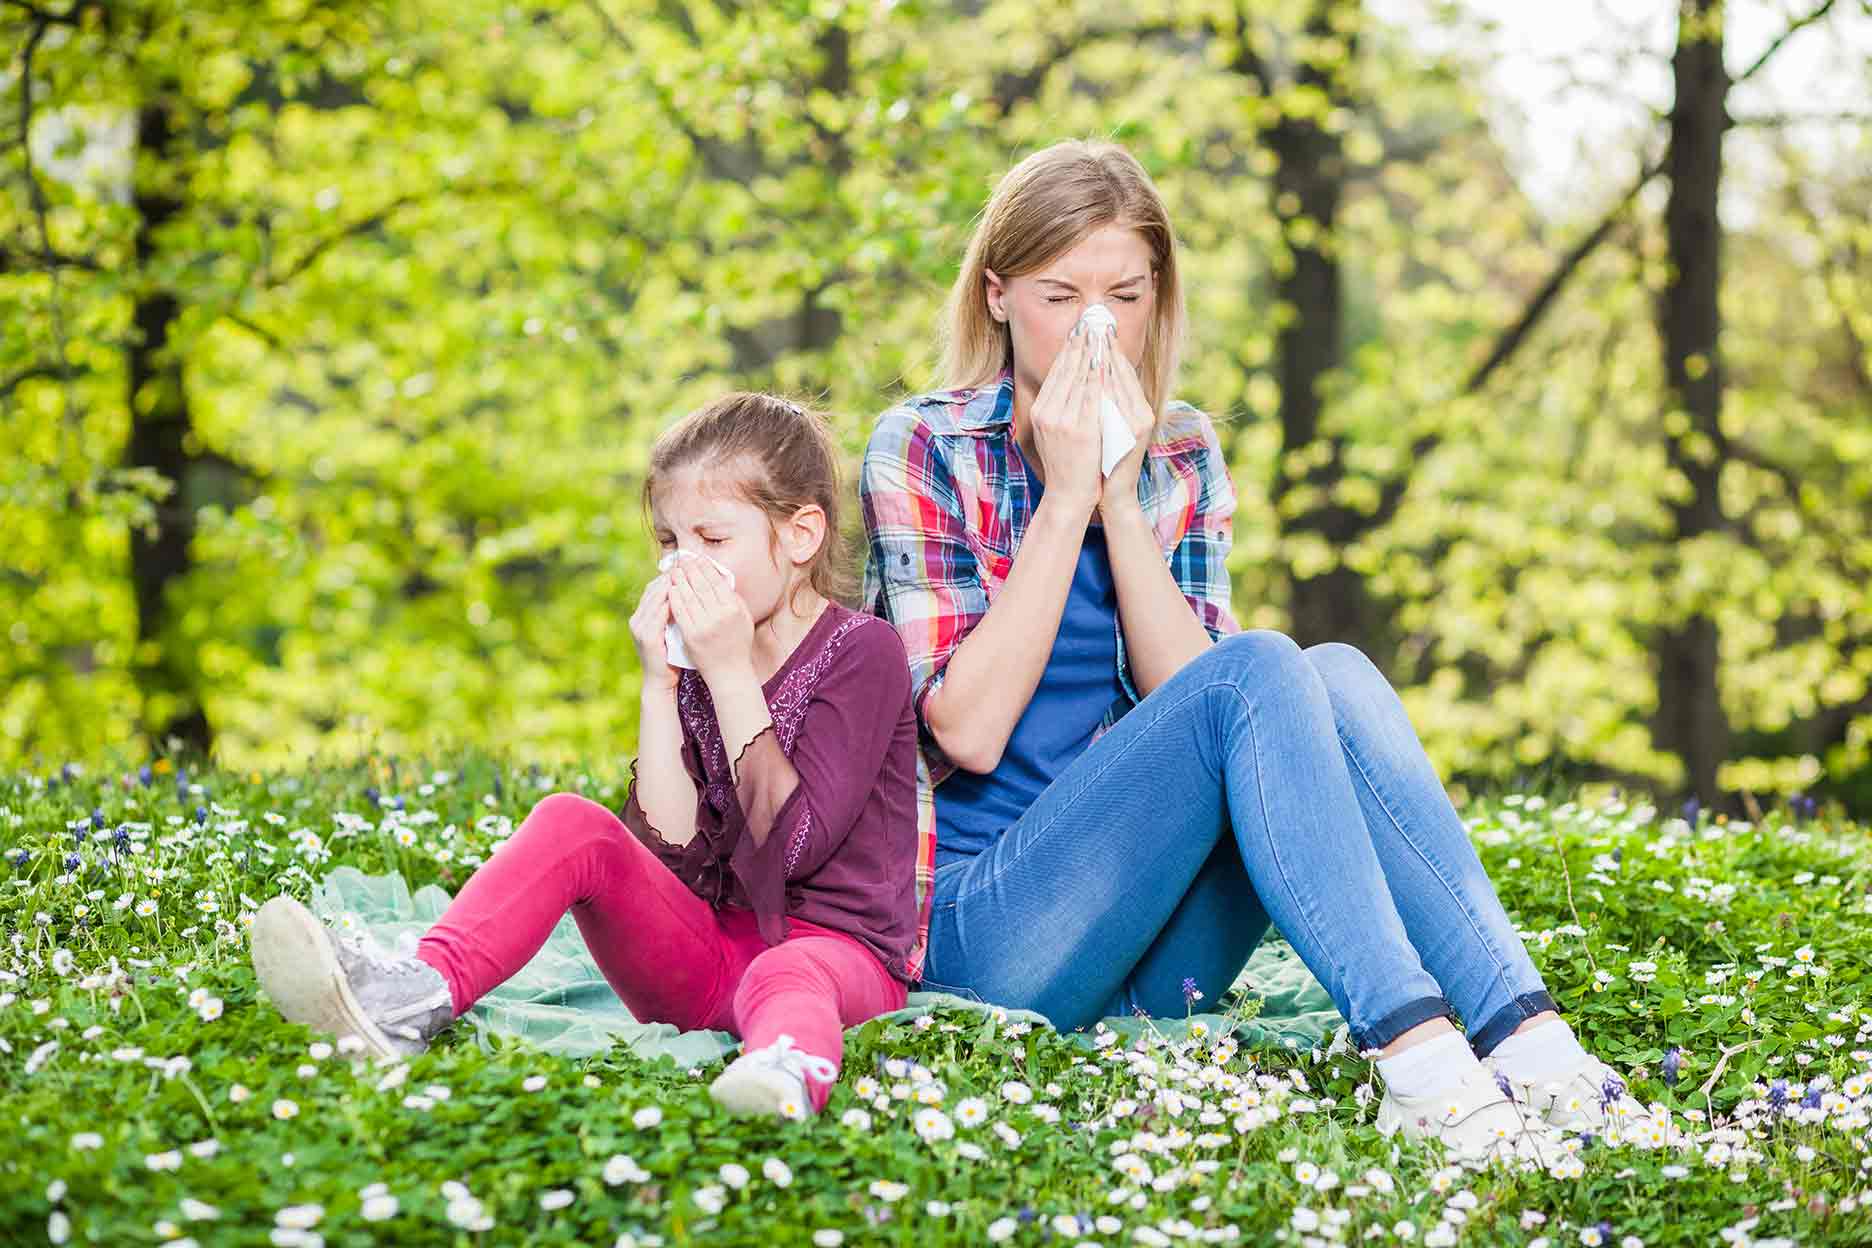 Do you suffer from Seasonal Allergies?